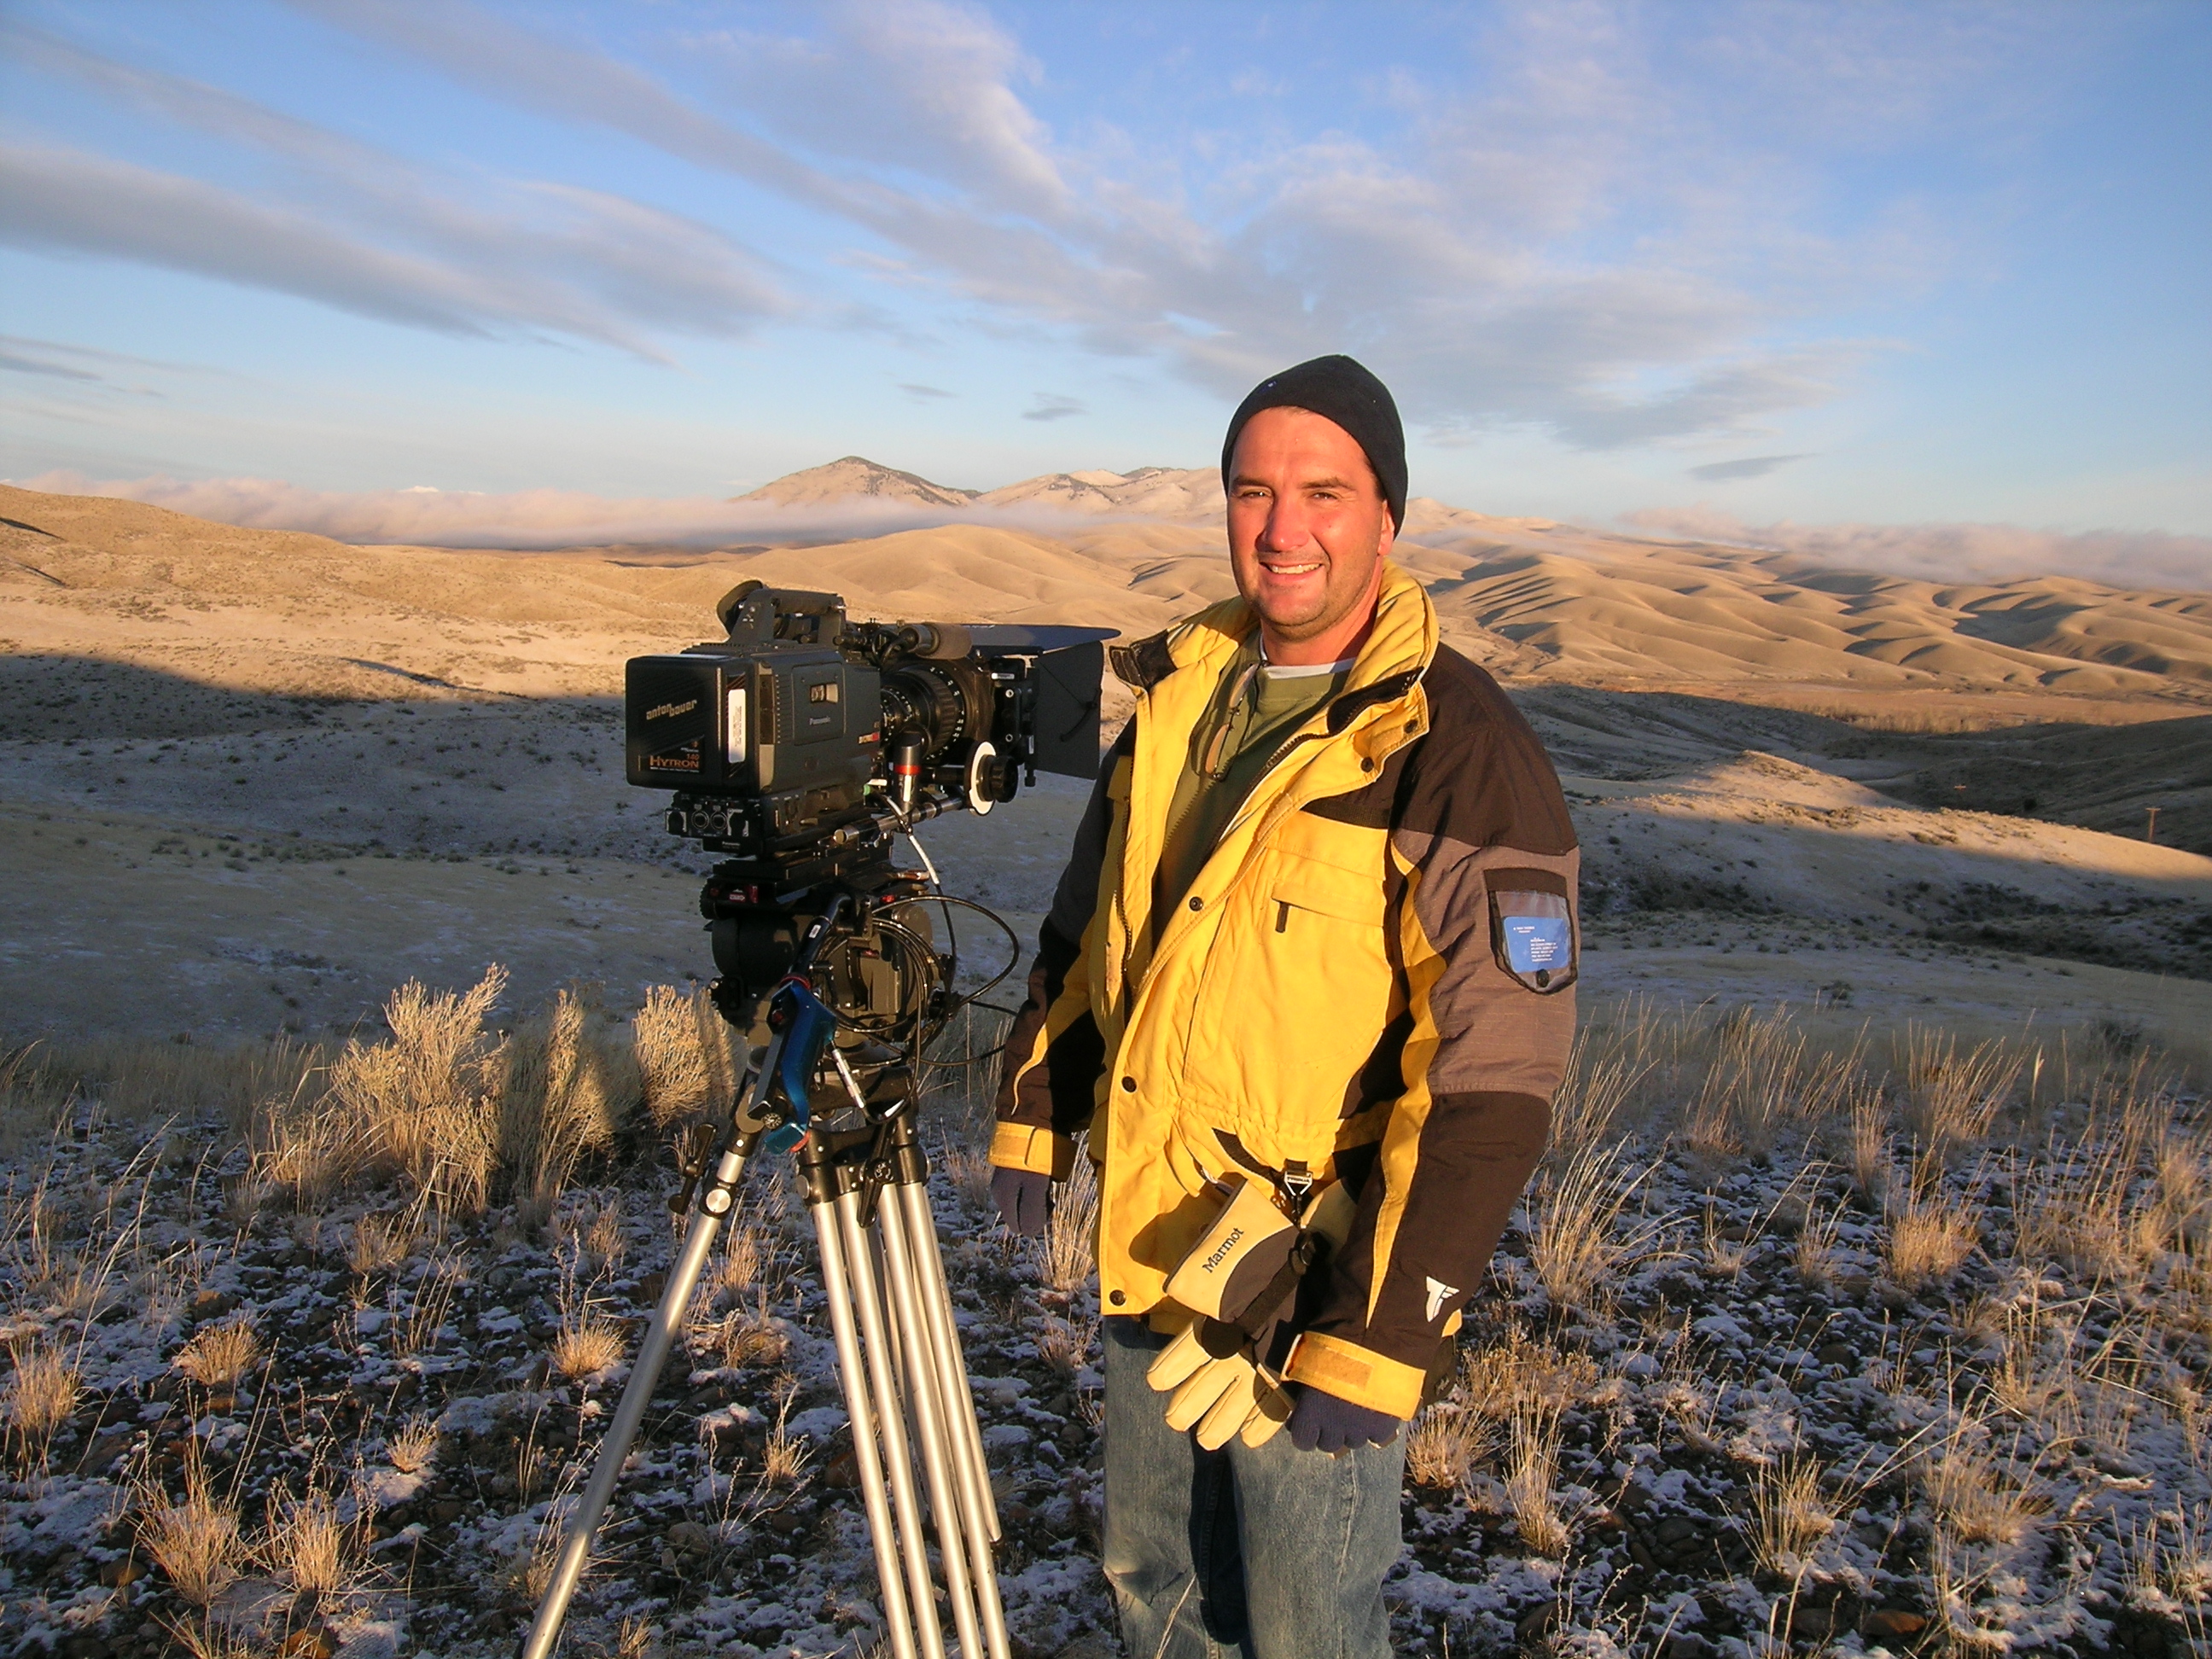 Troy working in Montana.